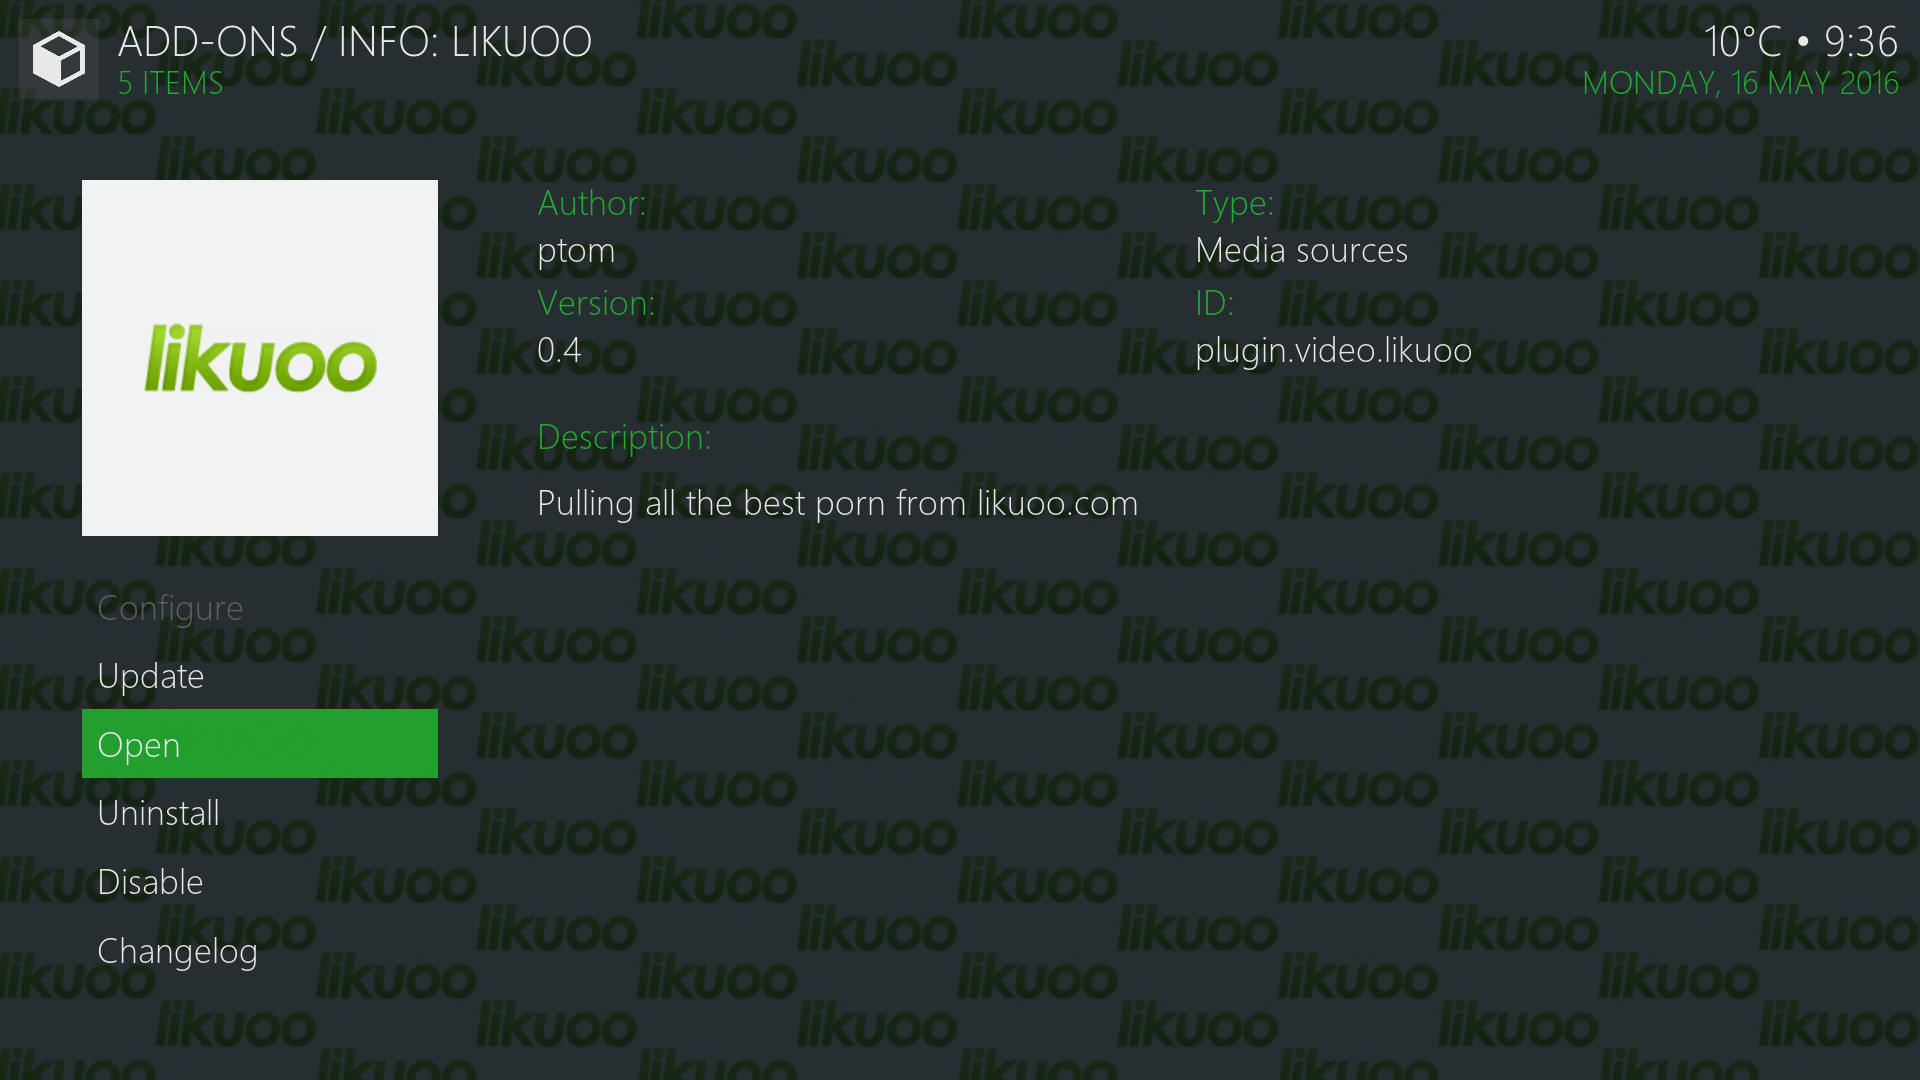 1920x1080 Good Morning Guys and Girls this blog will show you How to Install Likuoo  XXX Adult Kodi Addon on your Kodi/Spmc Media centre enabled device.